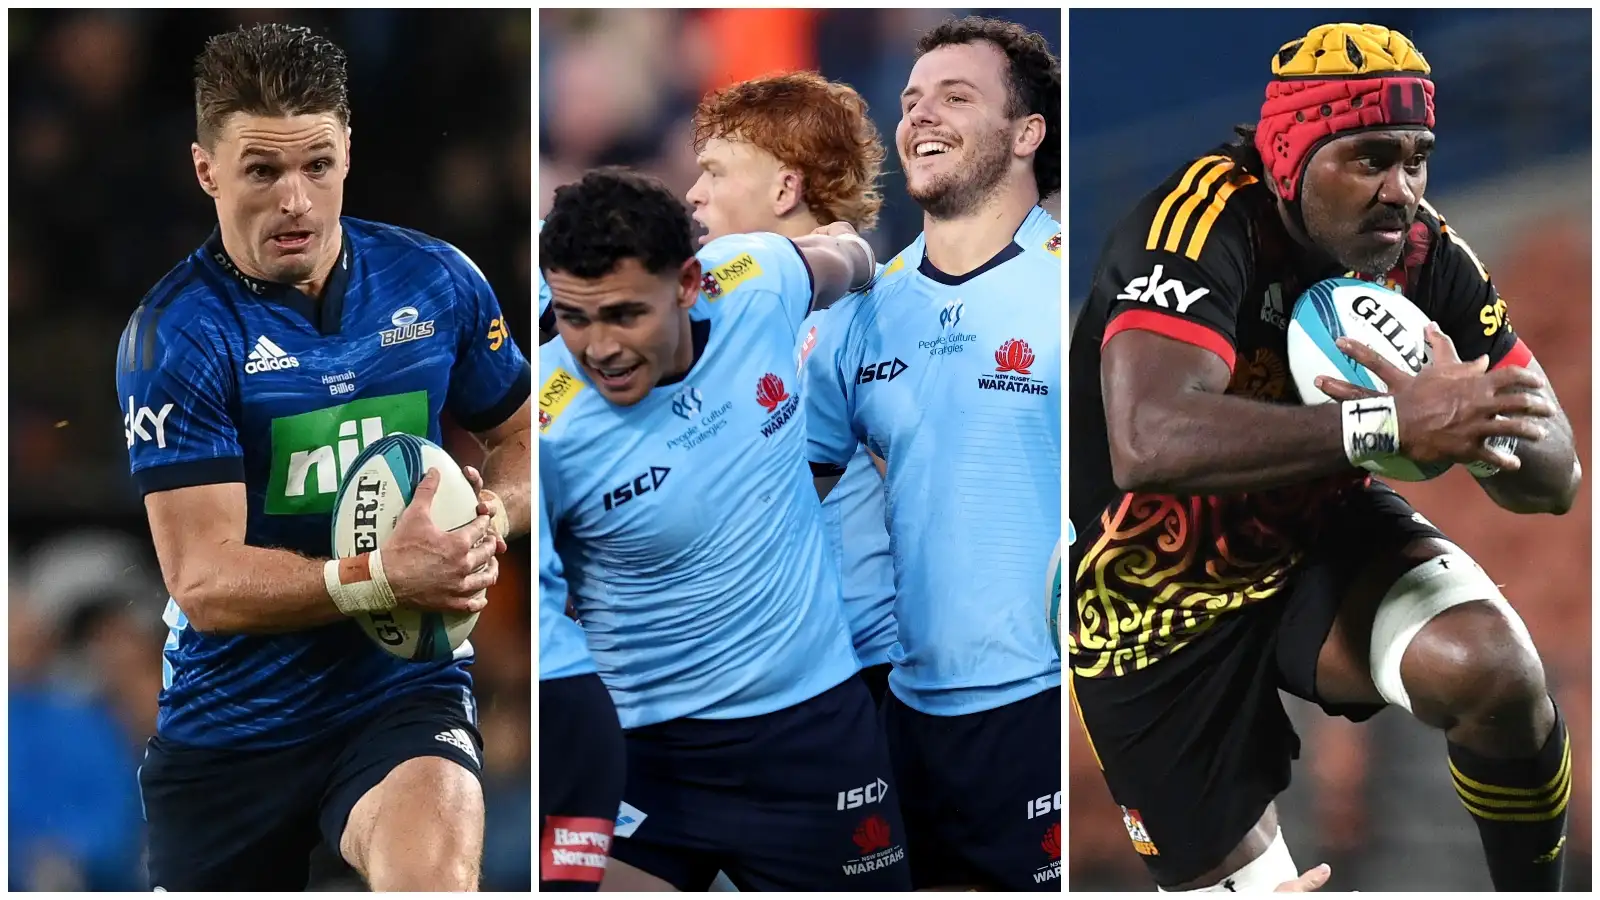 Super Rugby Pacific: The 2022 awards including the best player, fightback and funniest moment